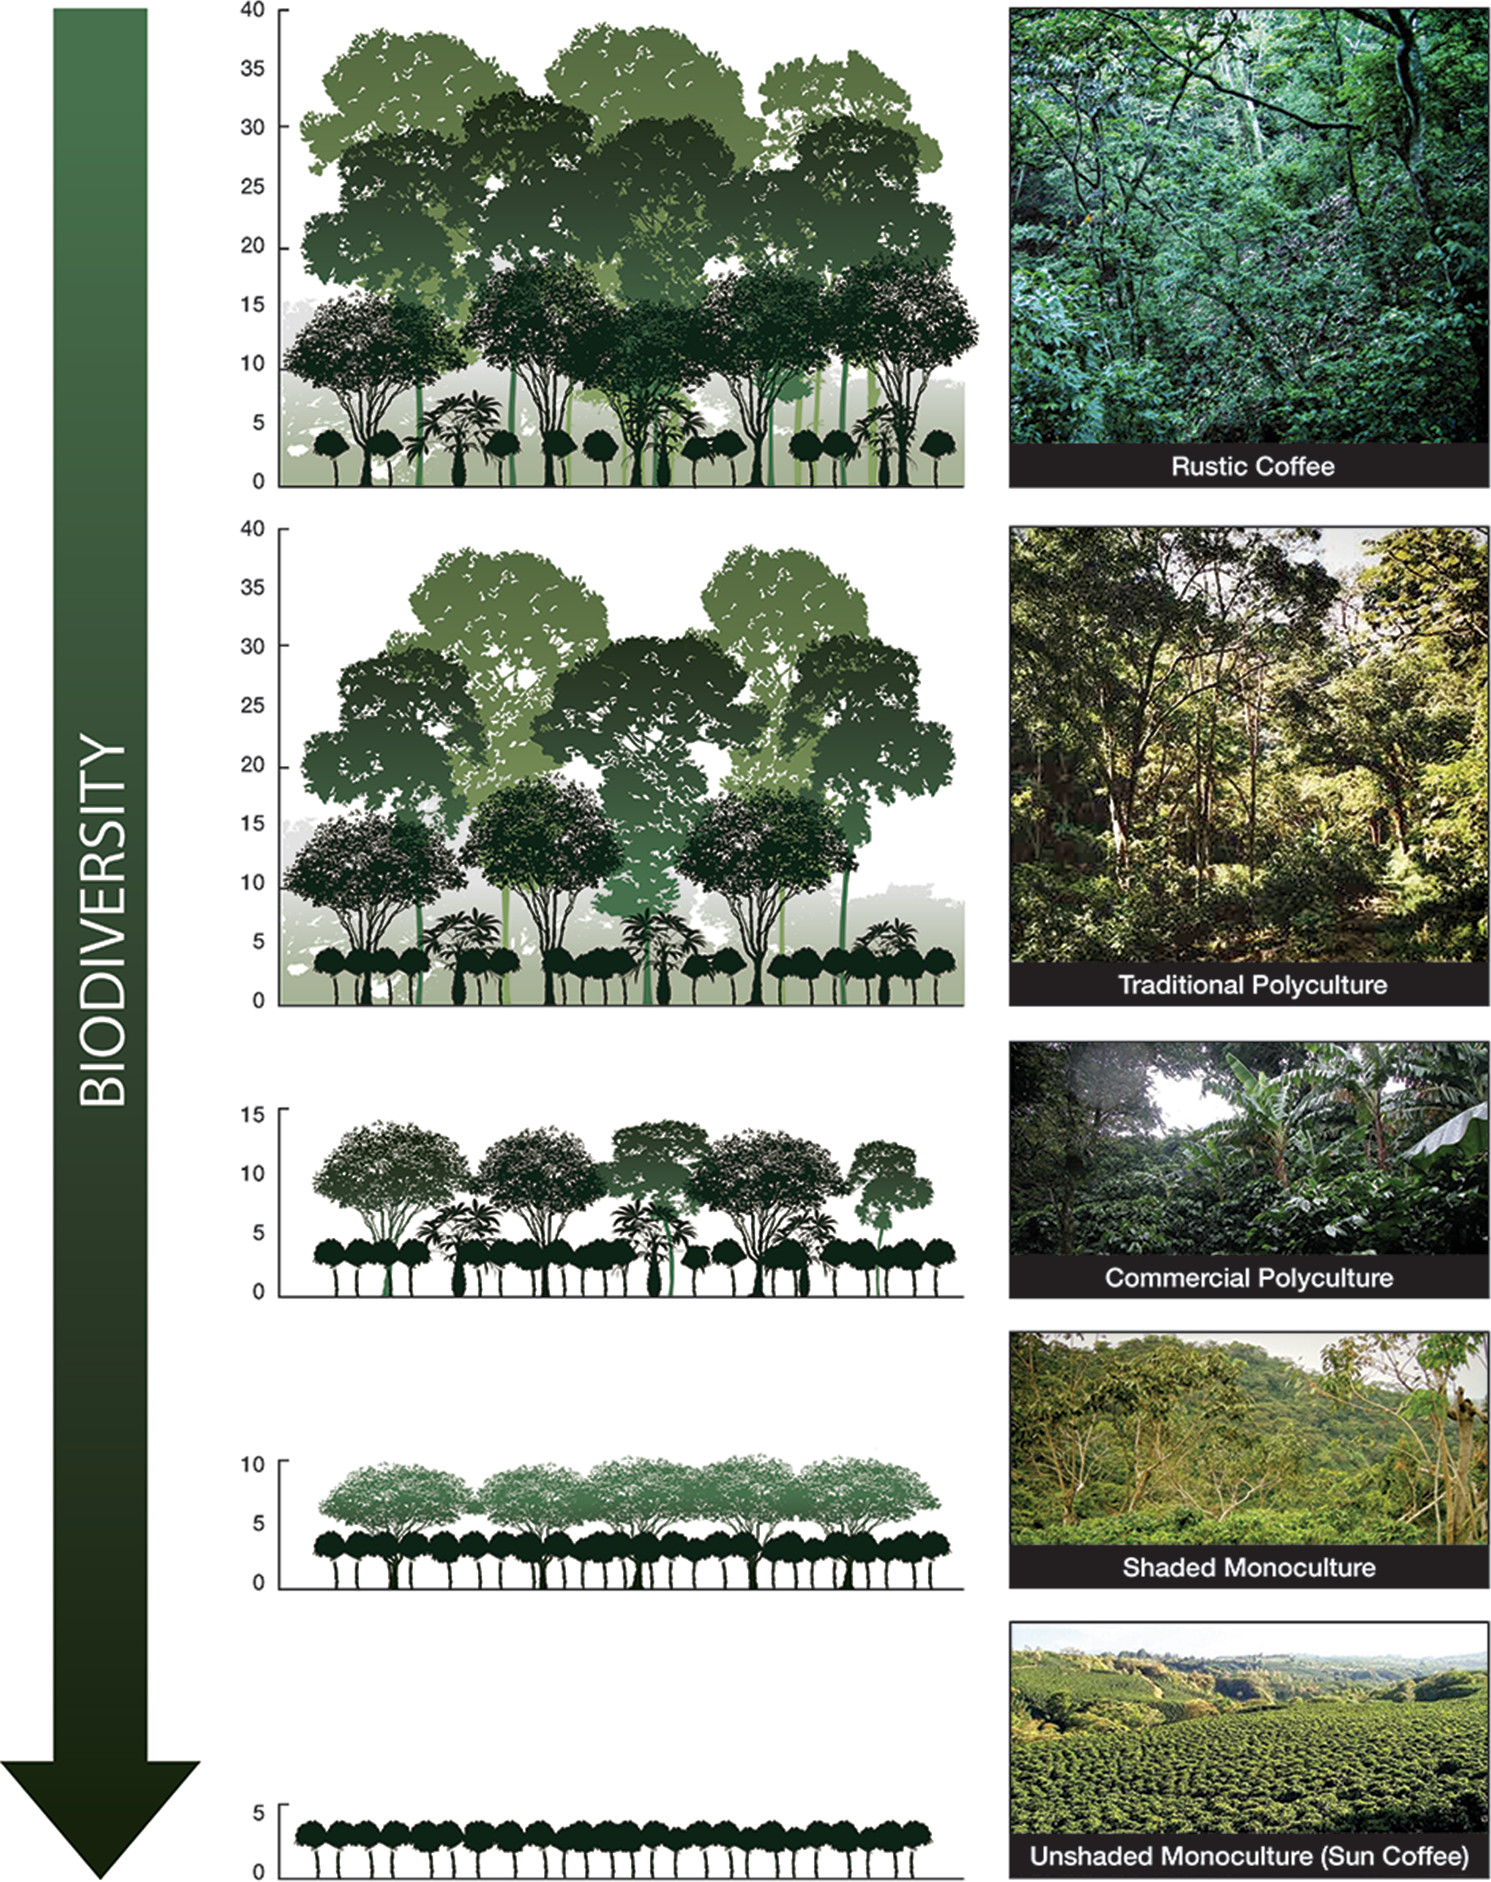 Photos and drawn graphics show the gradient of coffee management systems from diverse agroforestry to monoculture.